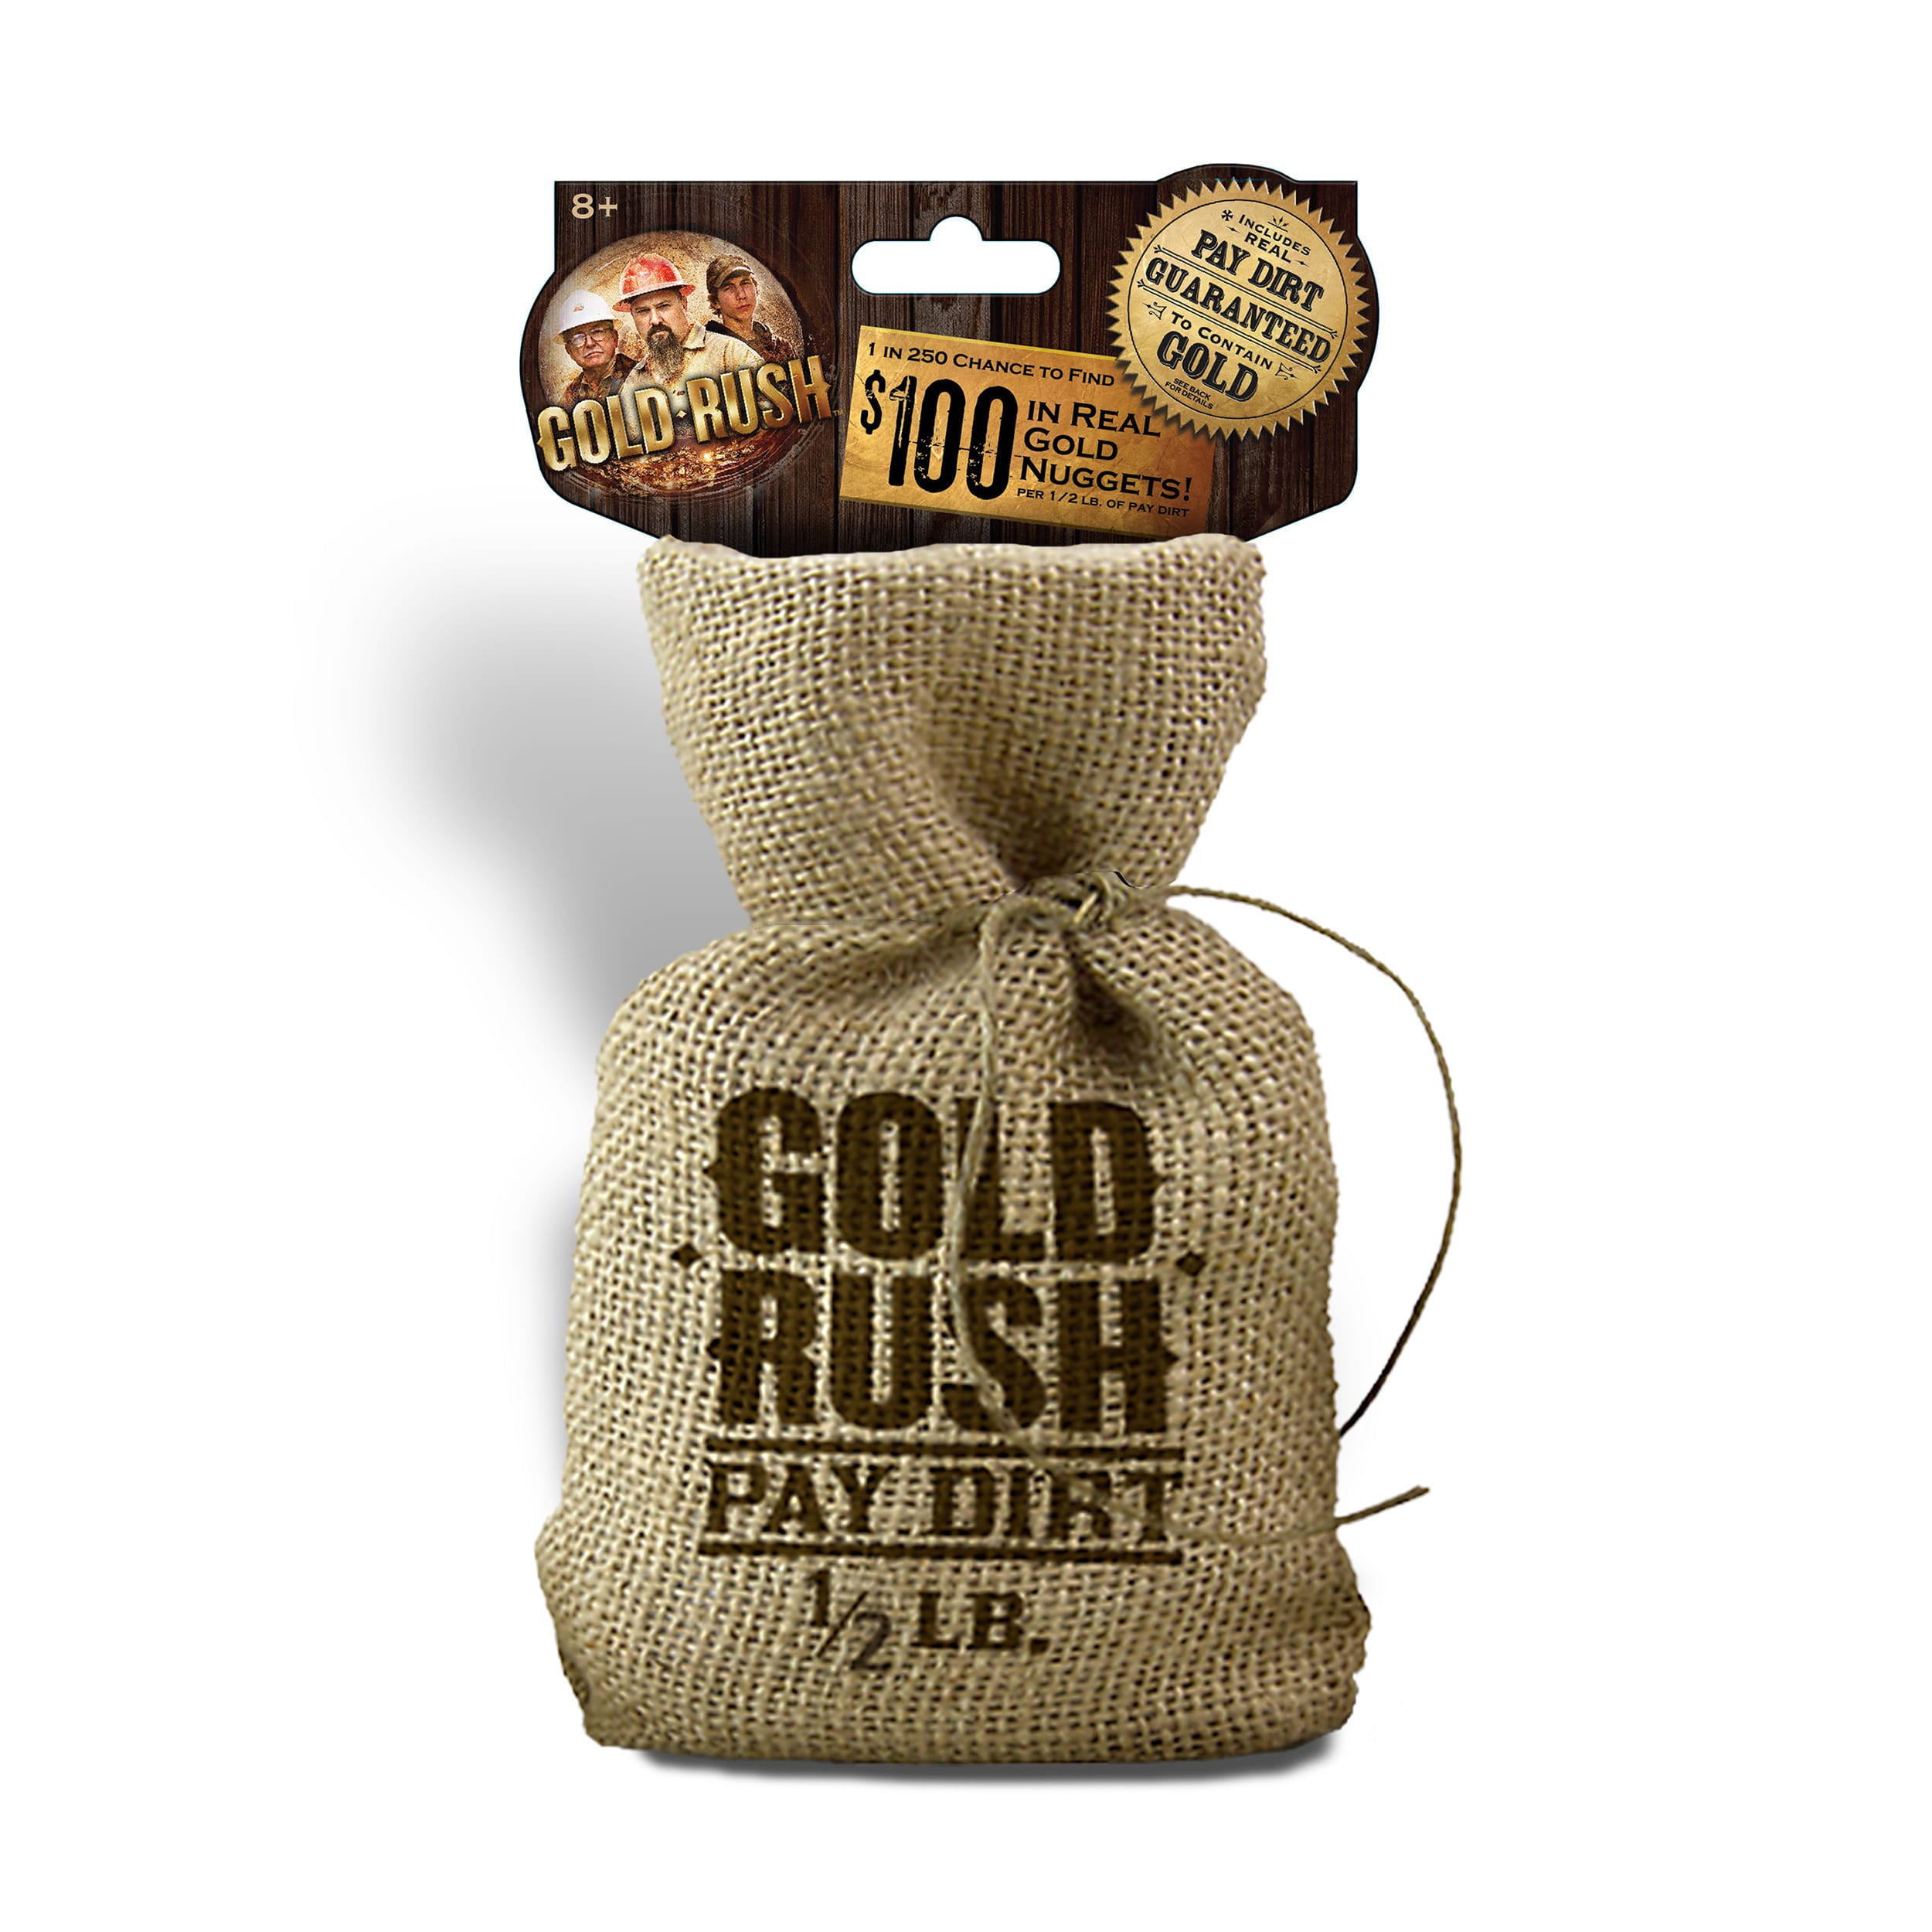 New ©andy K's K-dirt Sample Pak Unsearched Pay Dirt Added Gold 